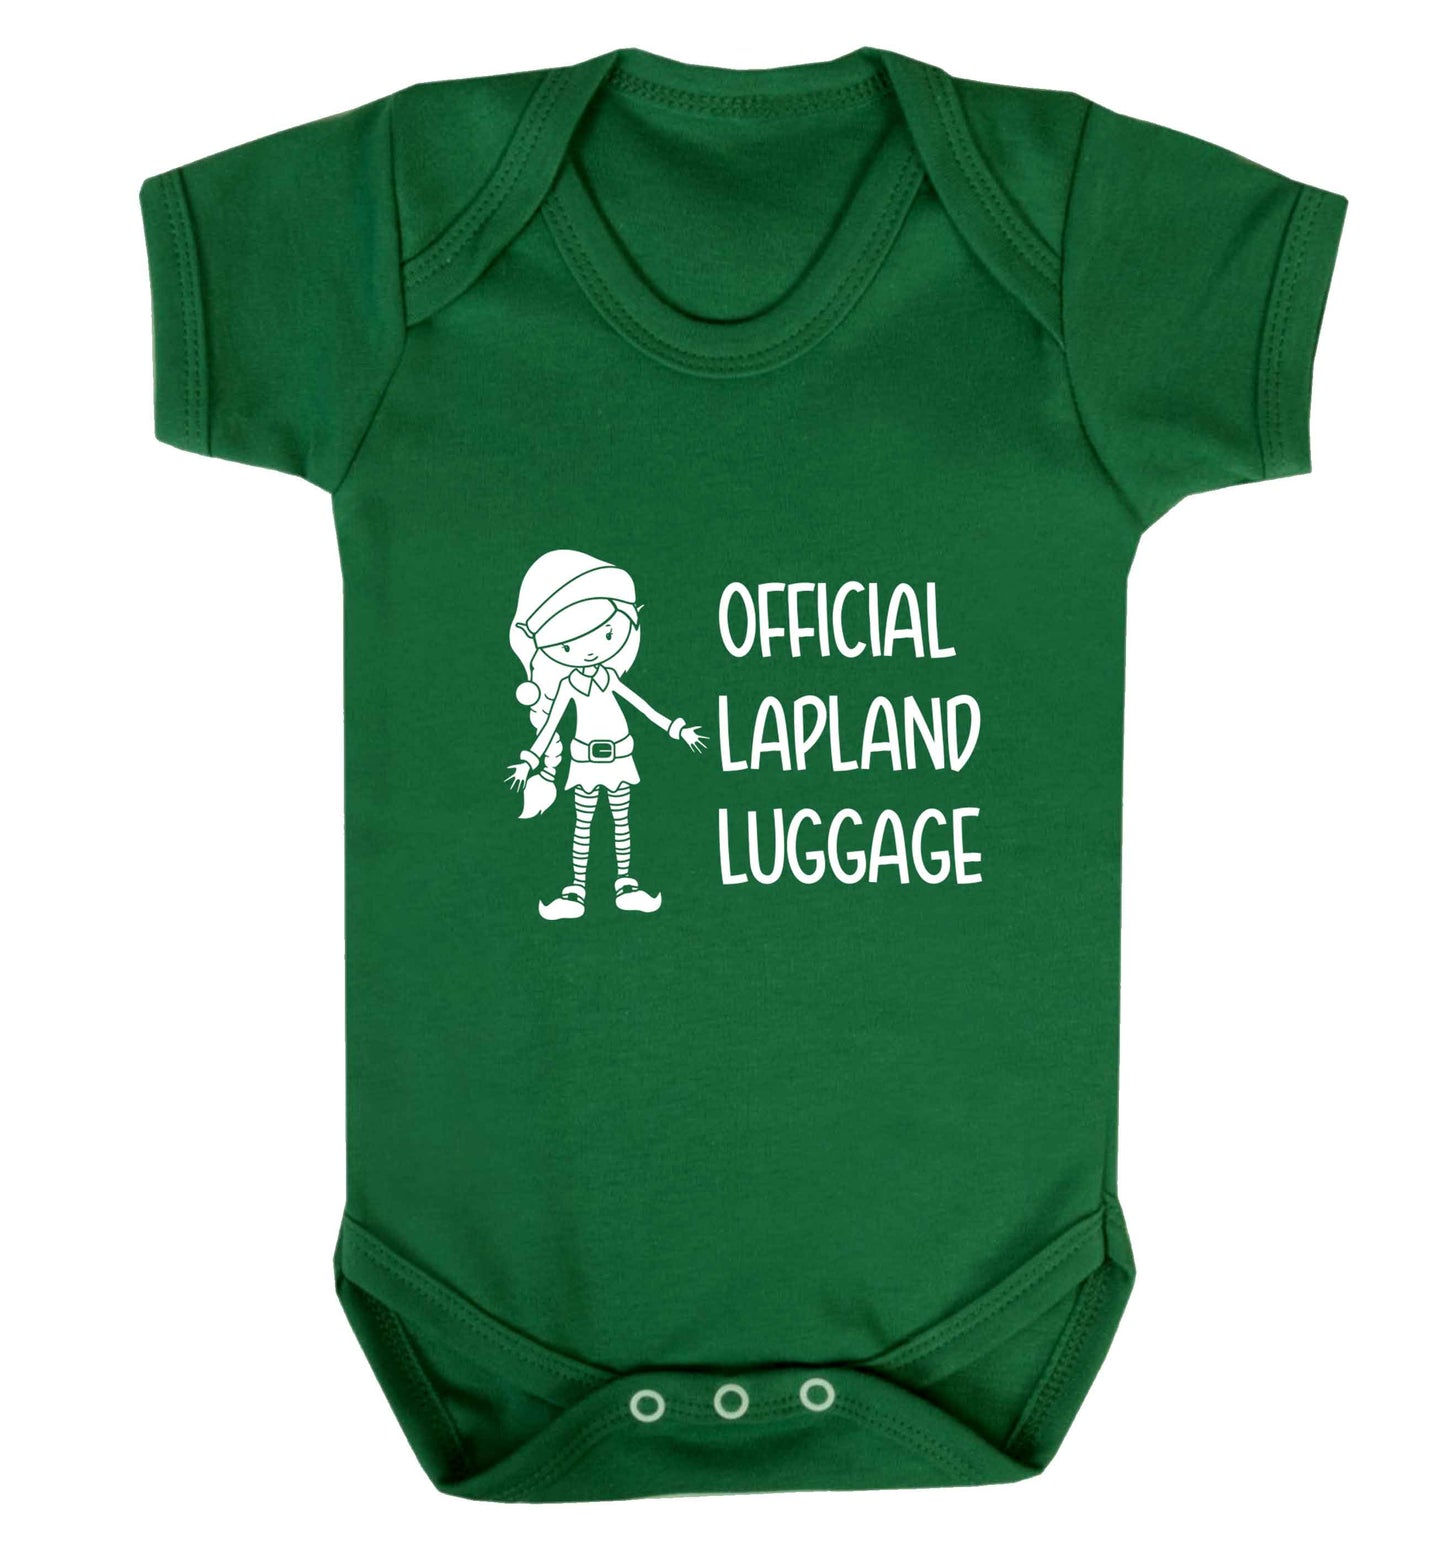 Official lapland luggage - Elf snowflake baby vest green 18-24 months